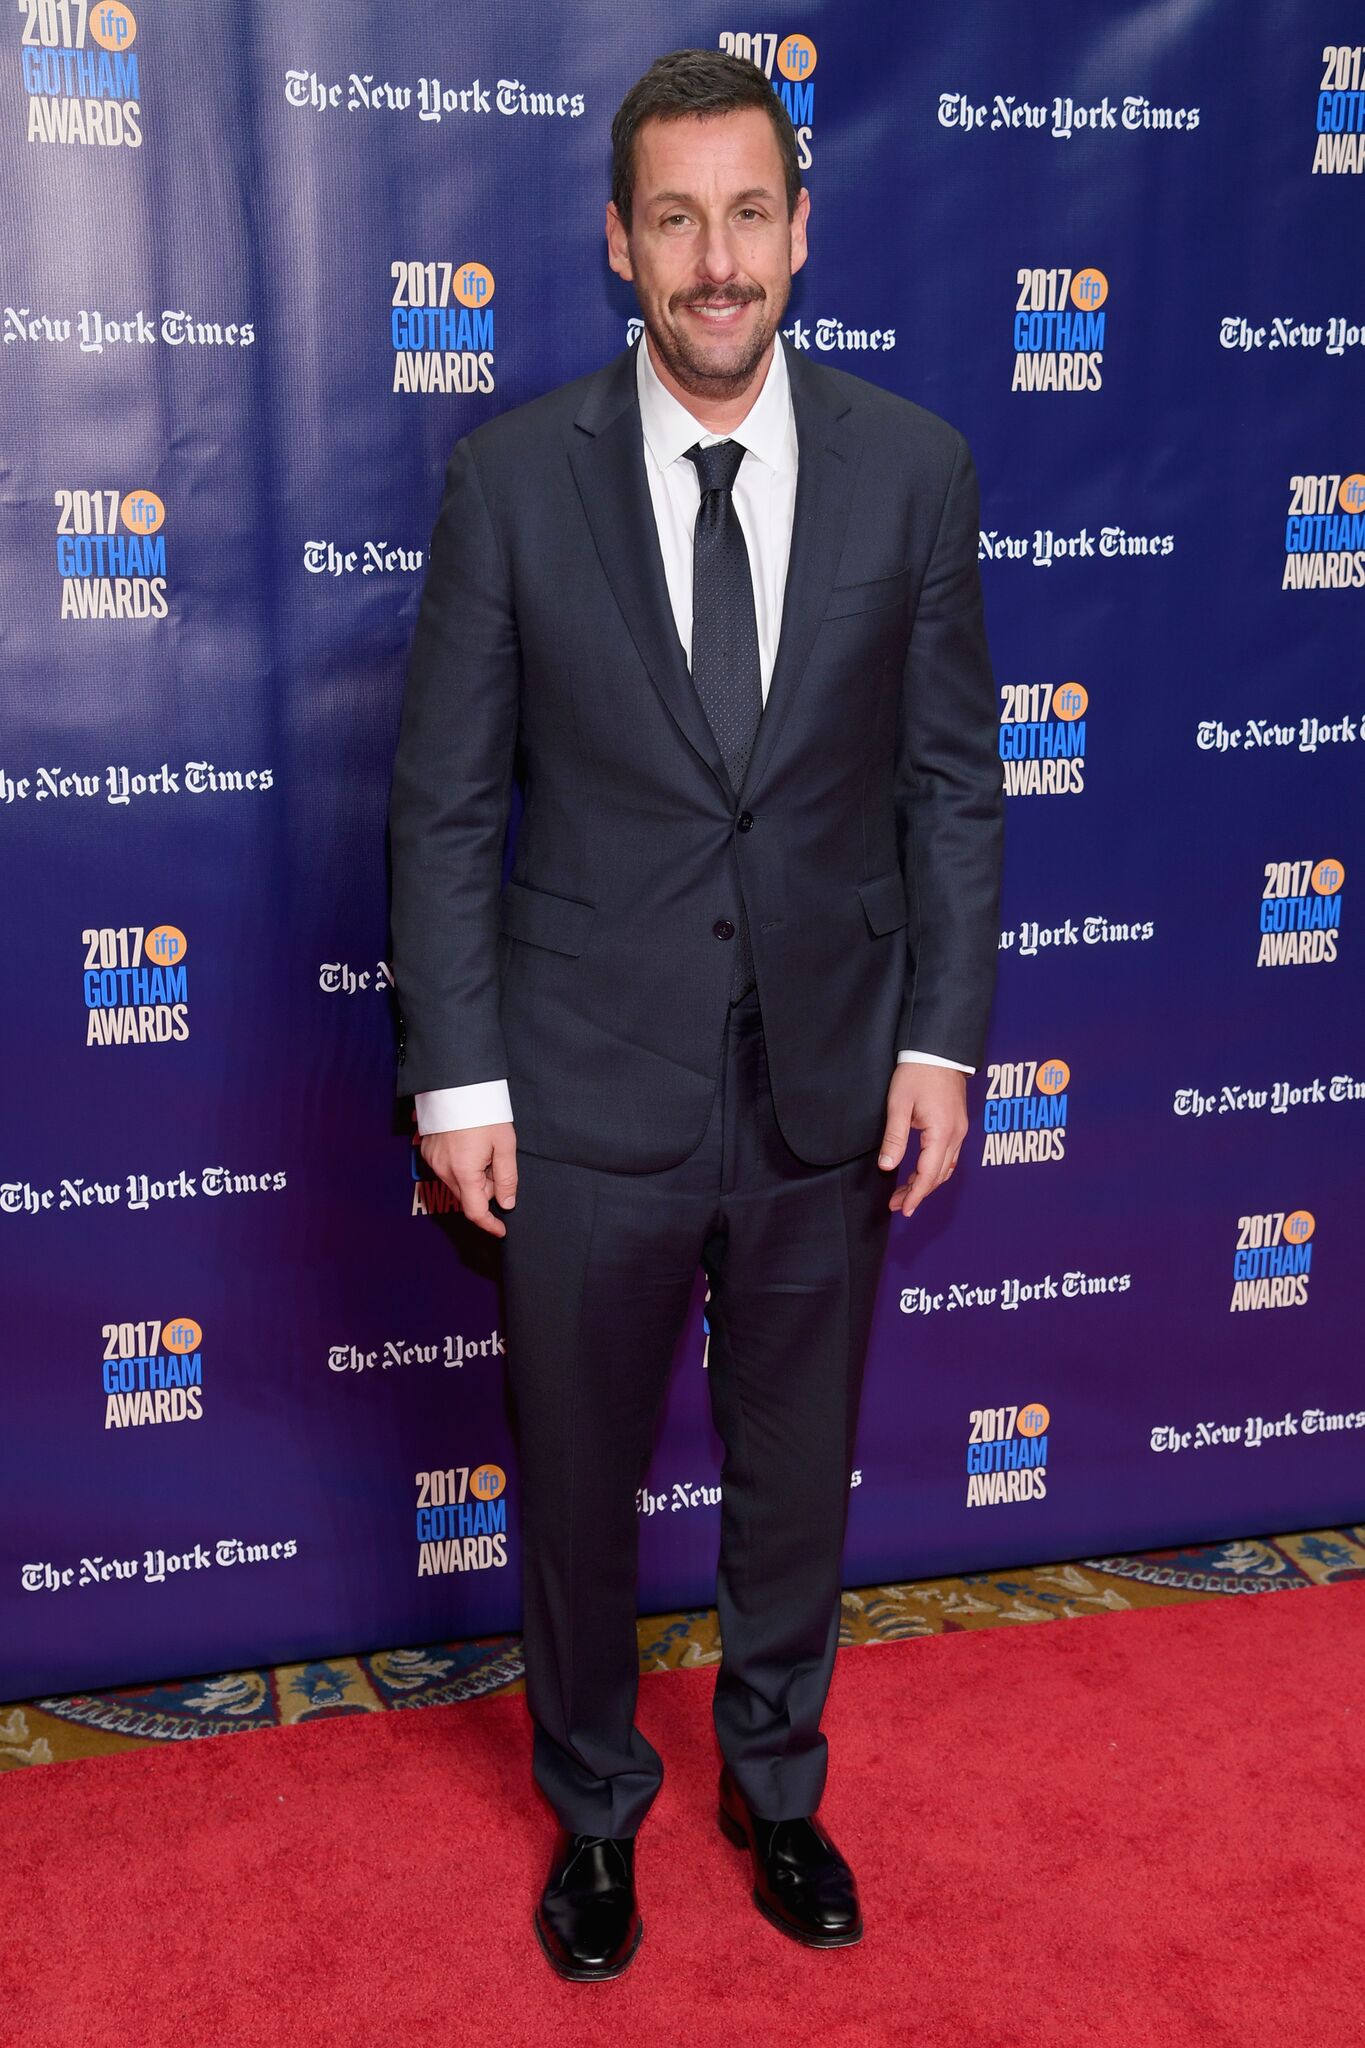 Actor Adam Sandler attends IFP's 27th Annual Gotham Independent Film Awards | Getty Images